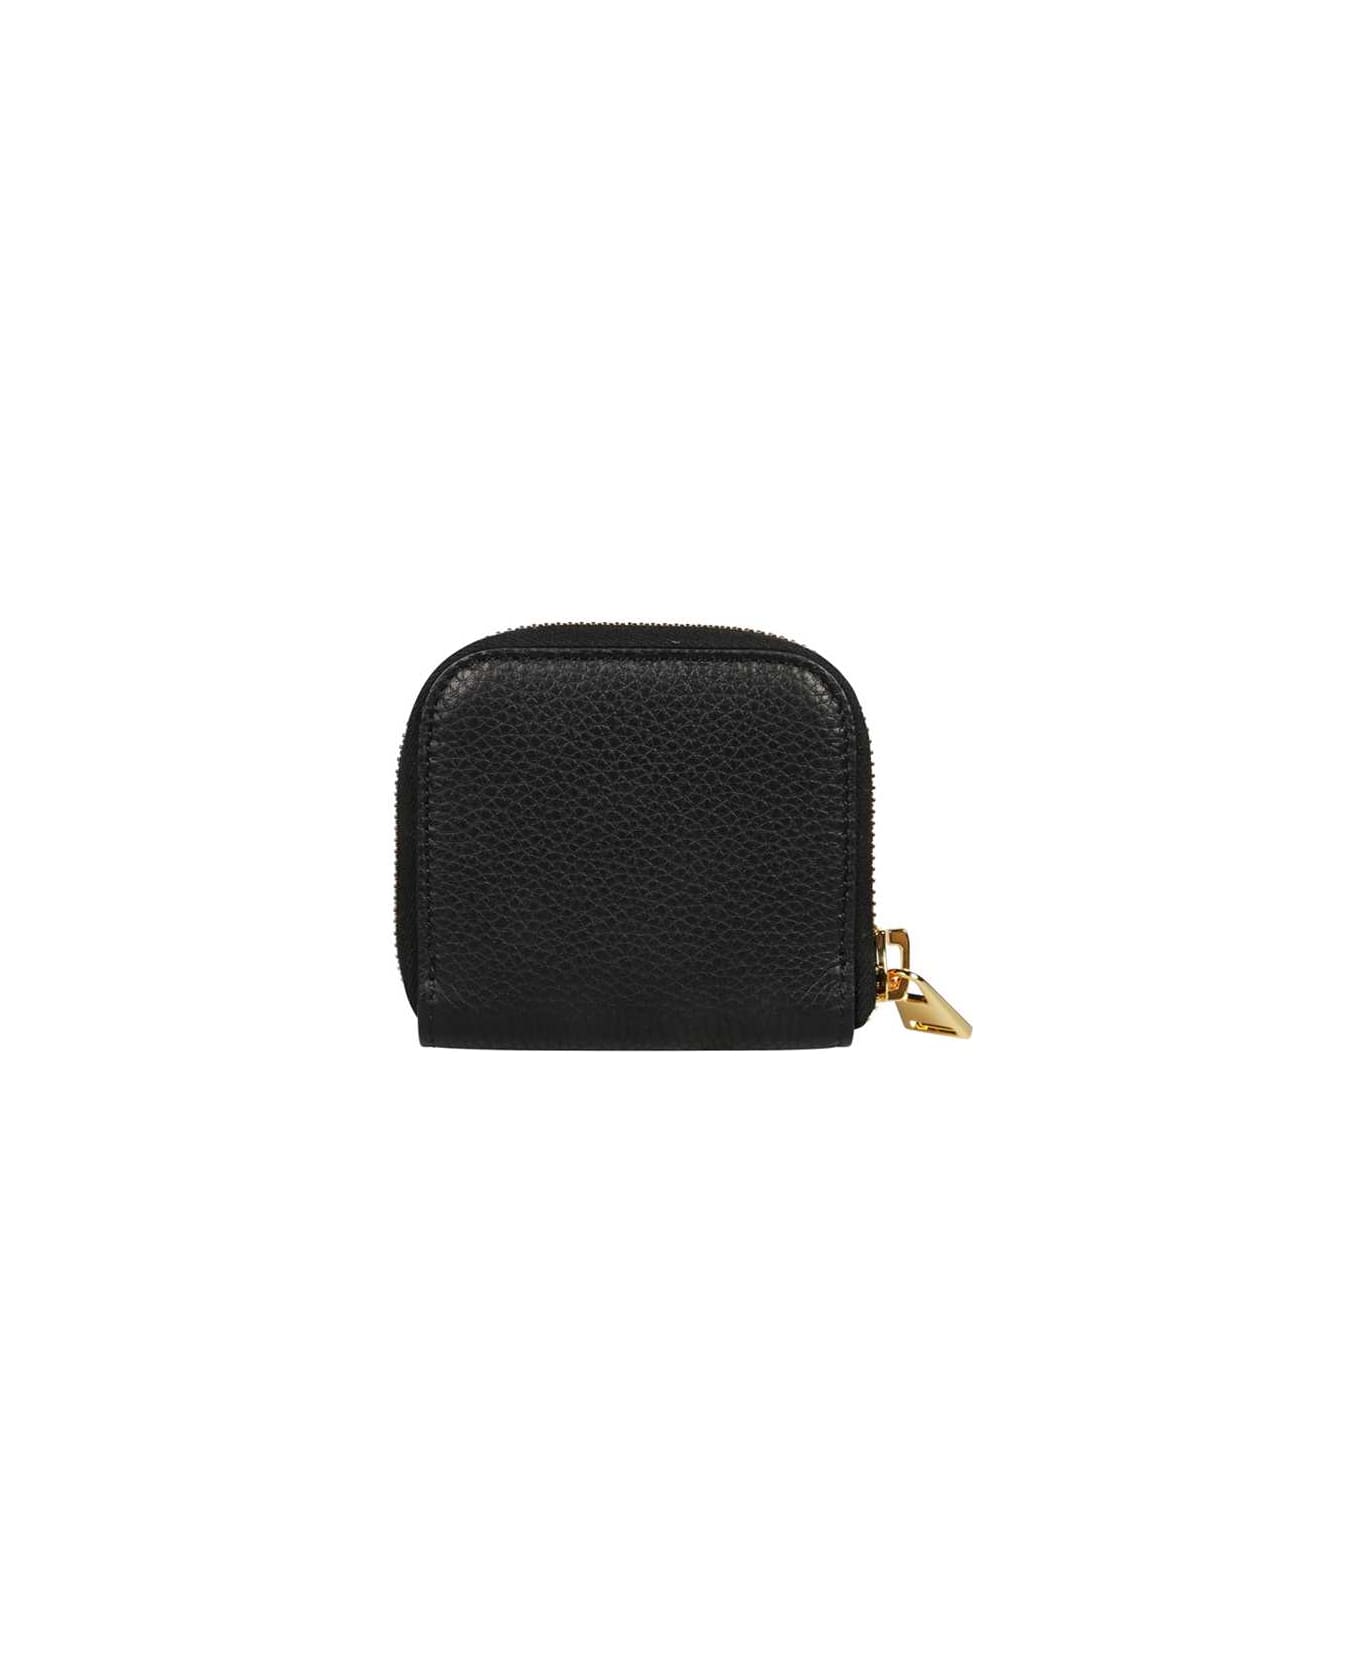 Tom Ford Leather Coin Purse - black